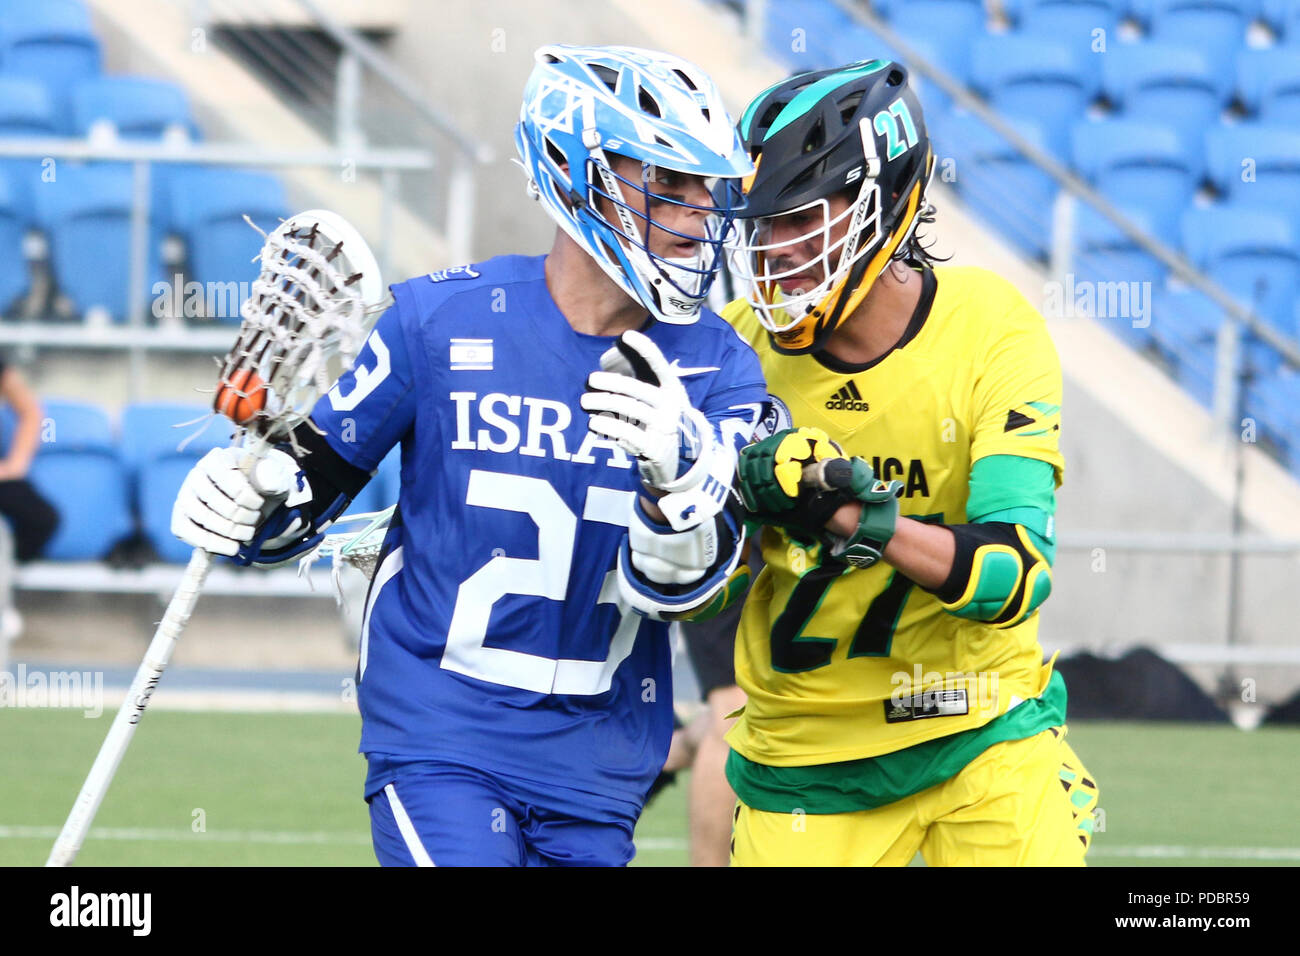 The World Lacrosse Championship in 2018 was held on July 12-21 2018 at the  Orde Wingate Institute for Physical Education and Sports in Netanya, Israel  Stock Photo - Alamy